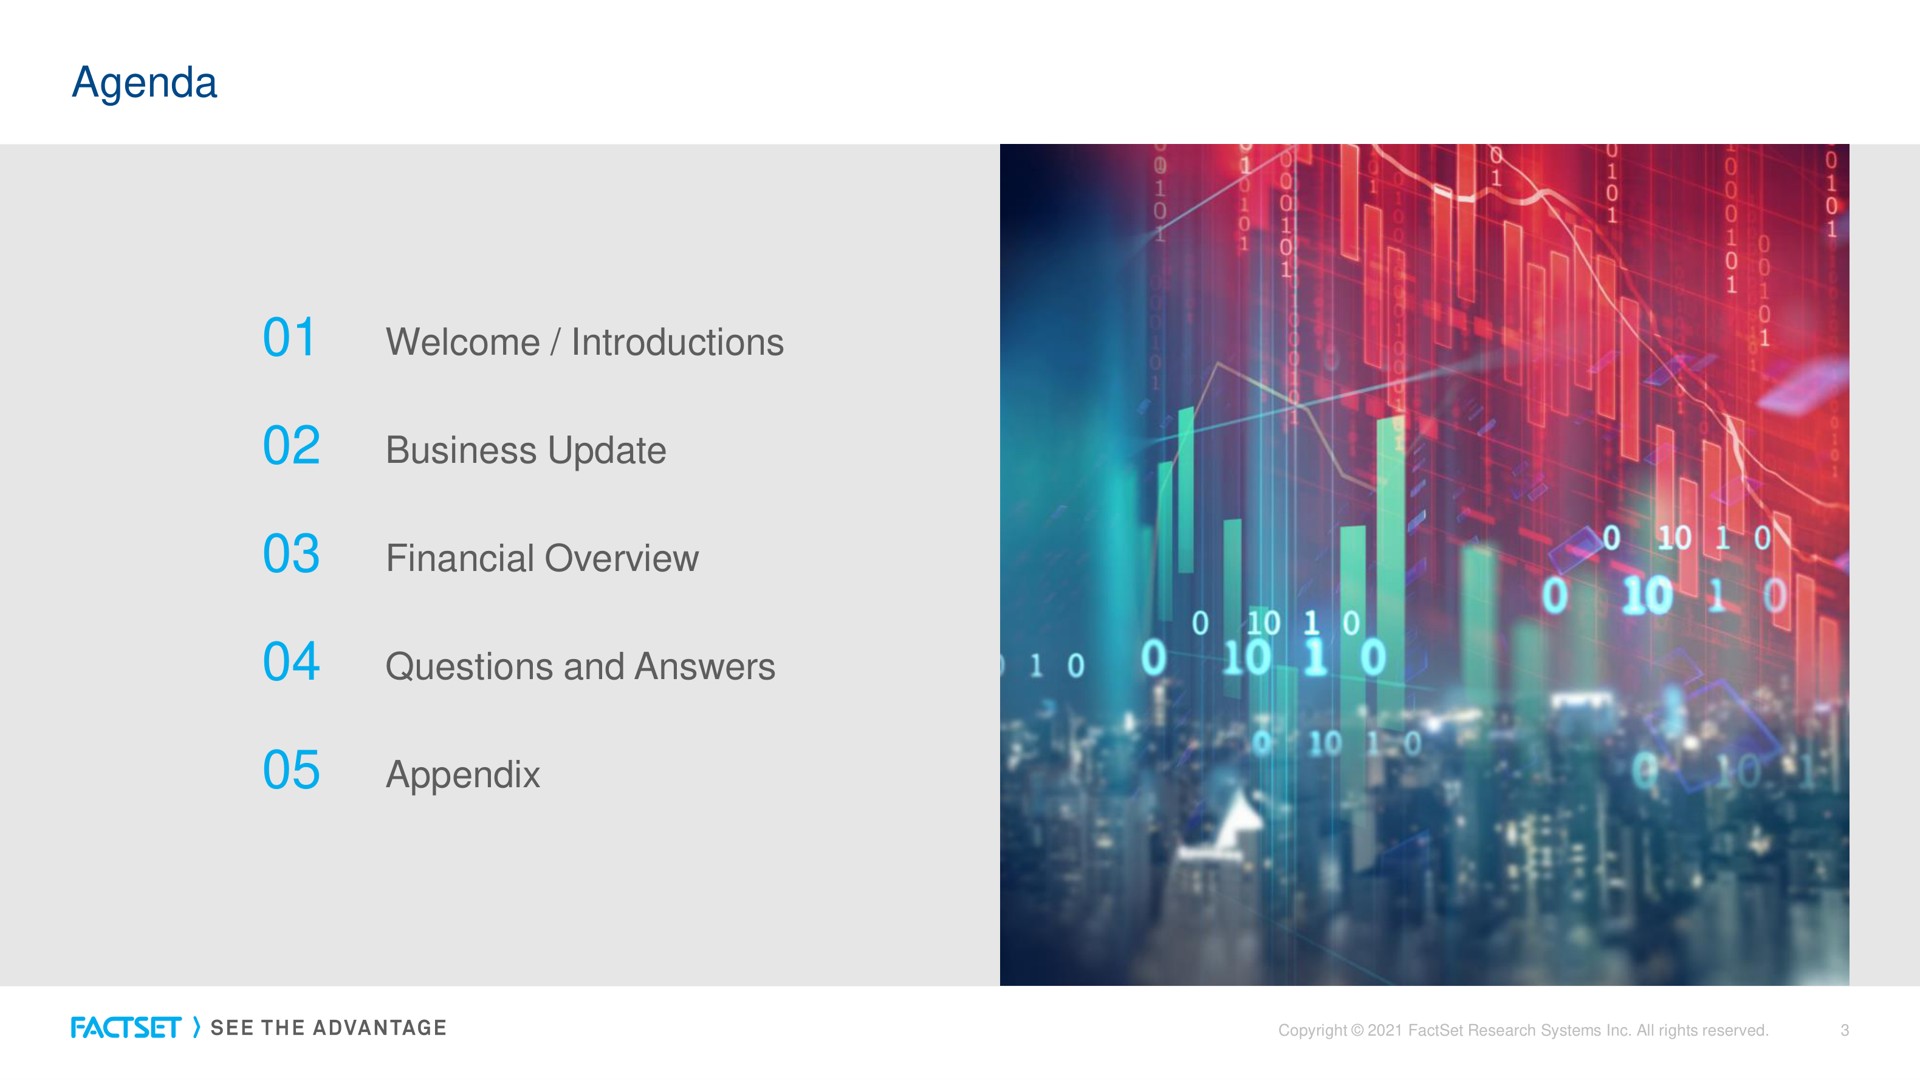 agenda welcome introductions business update financial overview questions and answers appendix | Factset